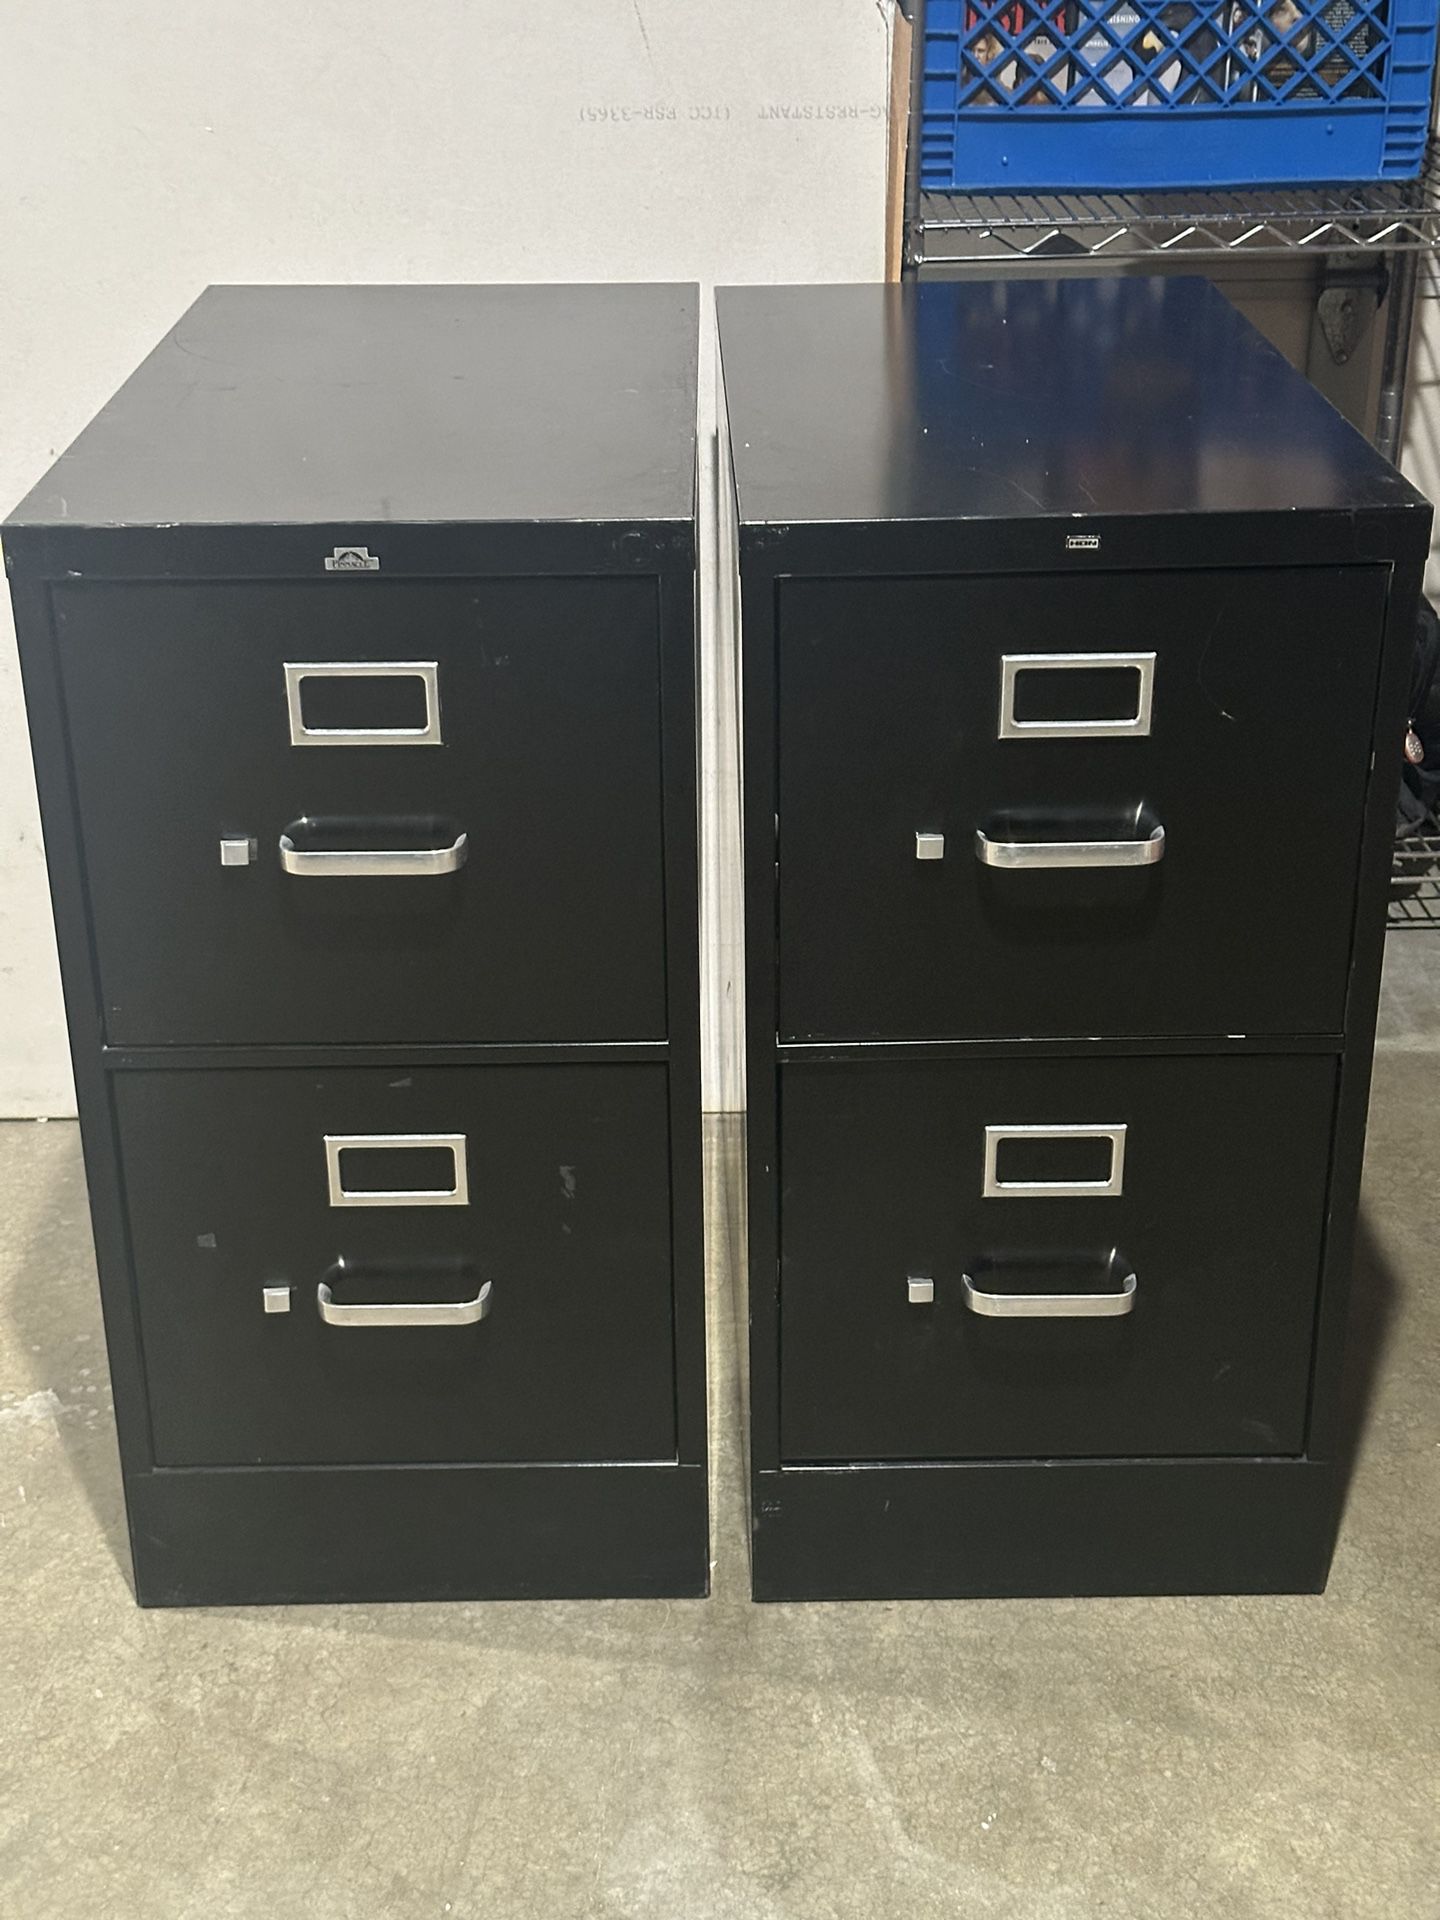 File Cabinets  40 Each